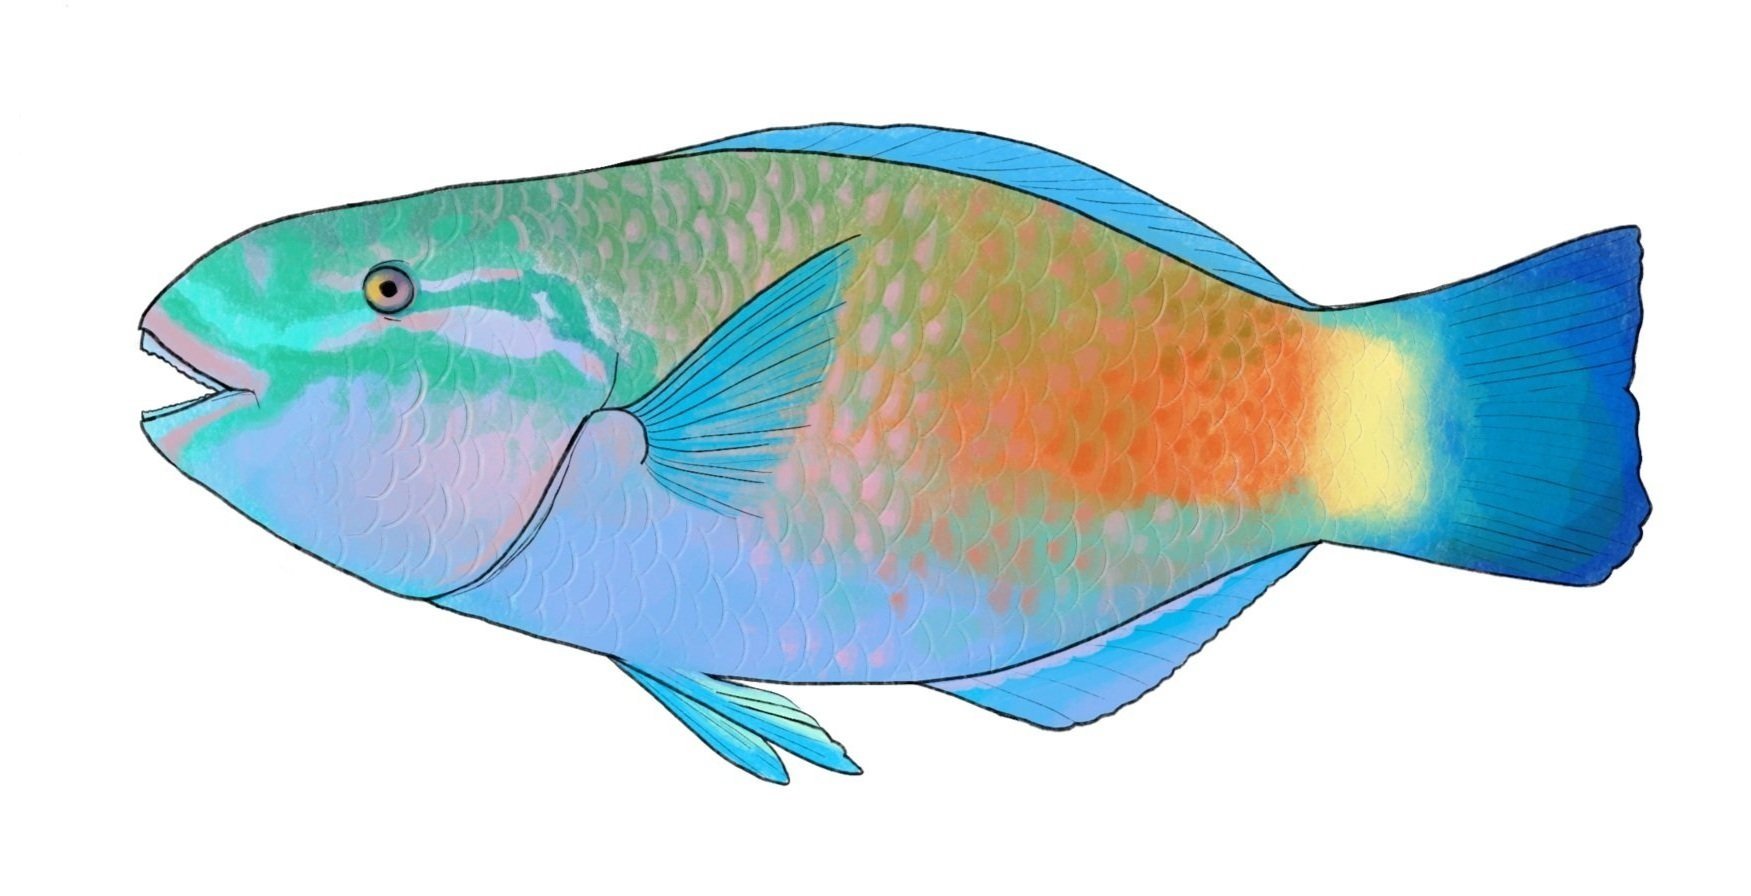 Bullethead parrotfish - By Lilly Crosby